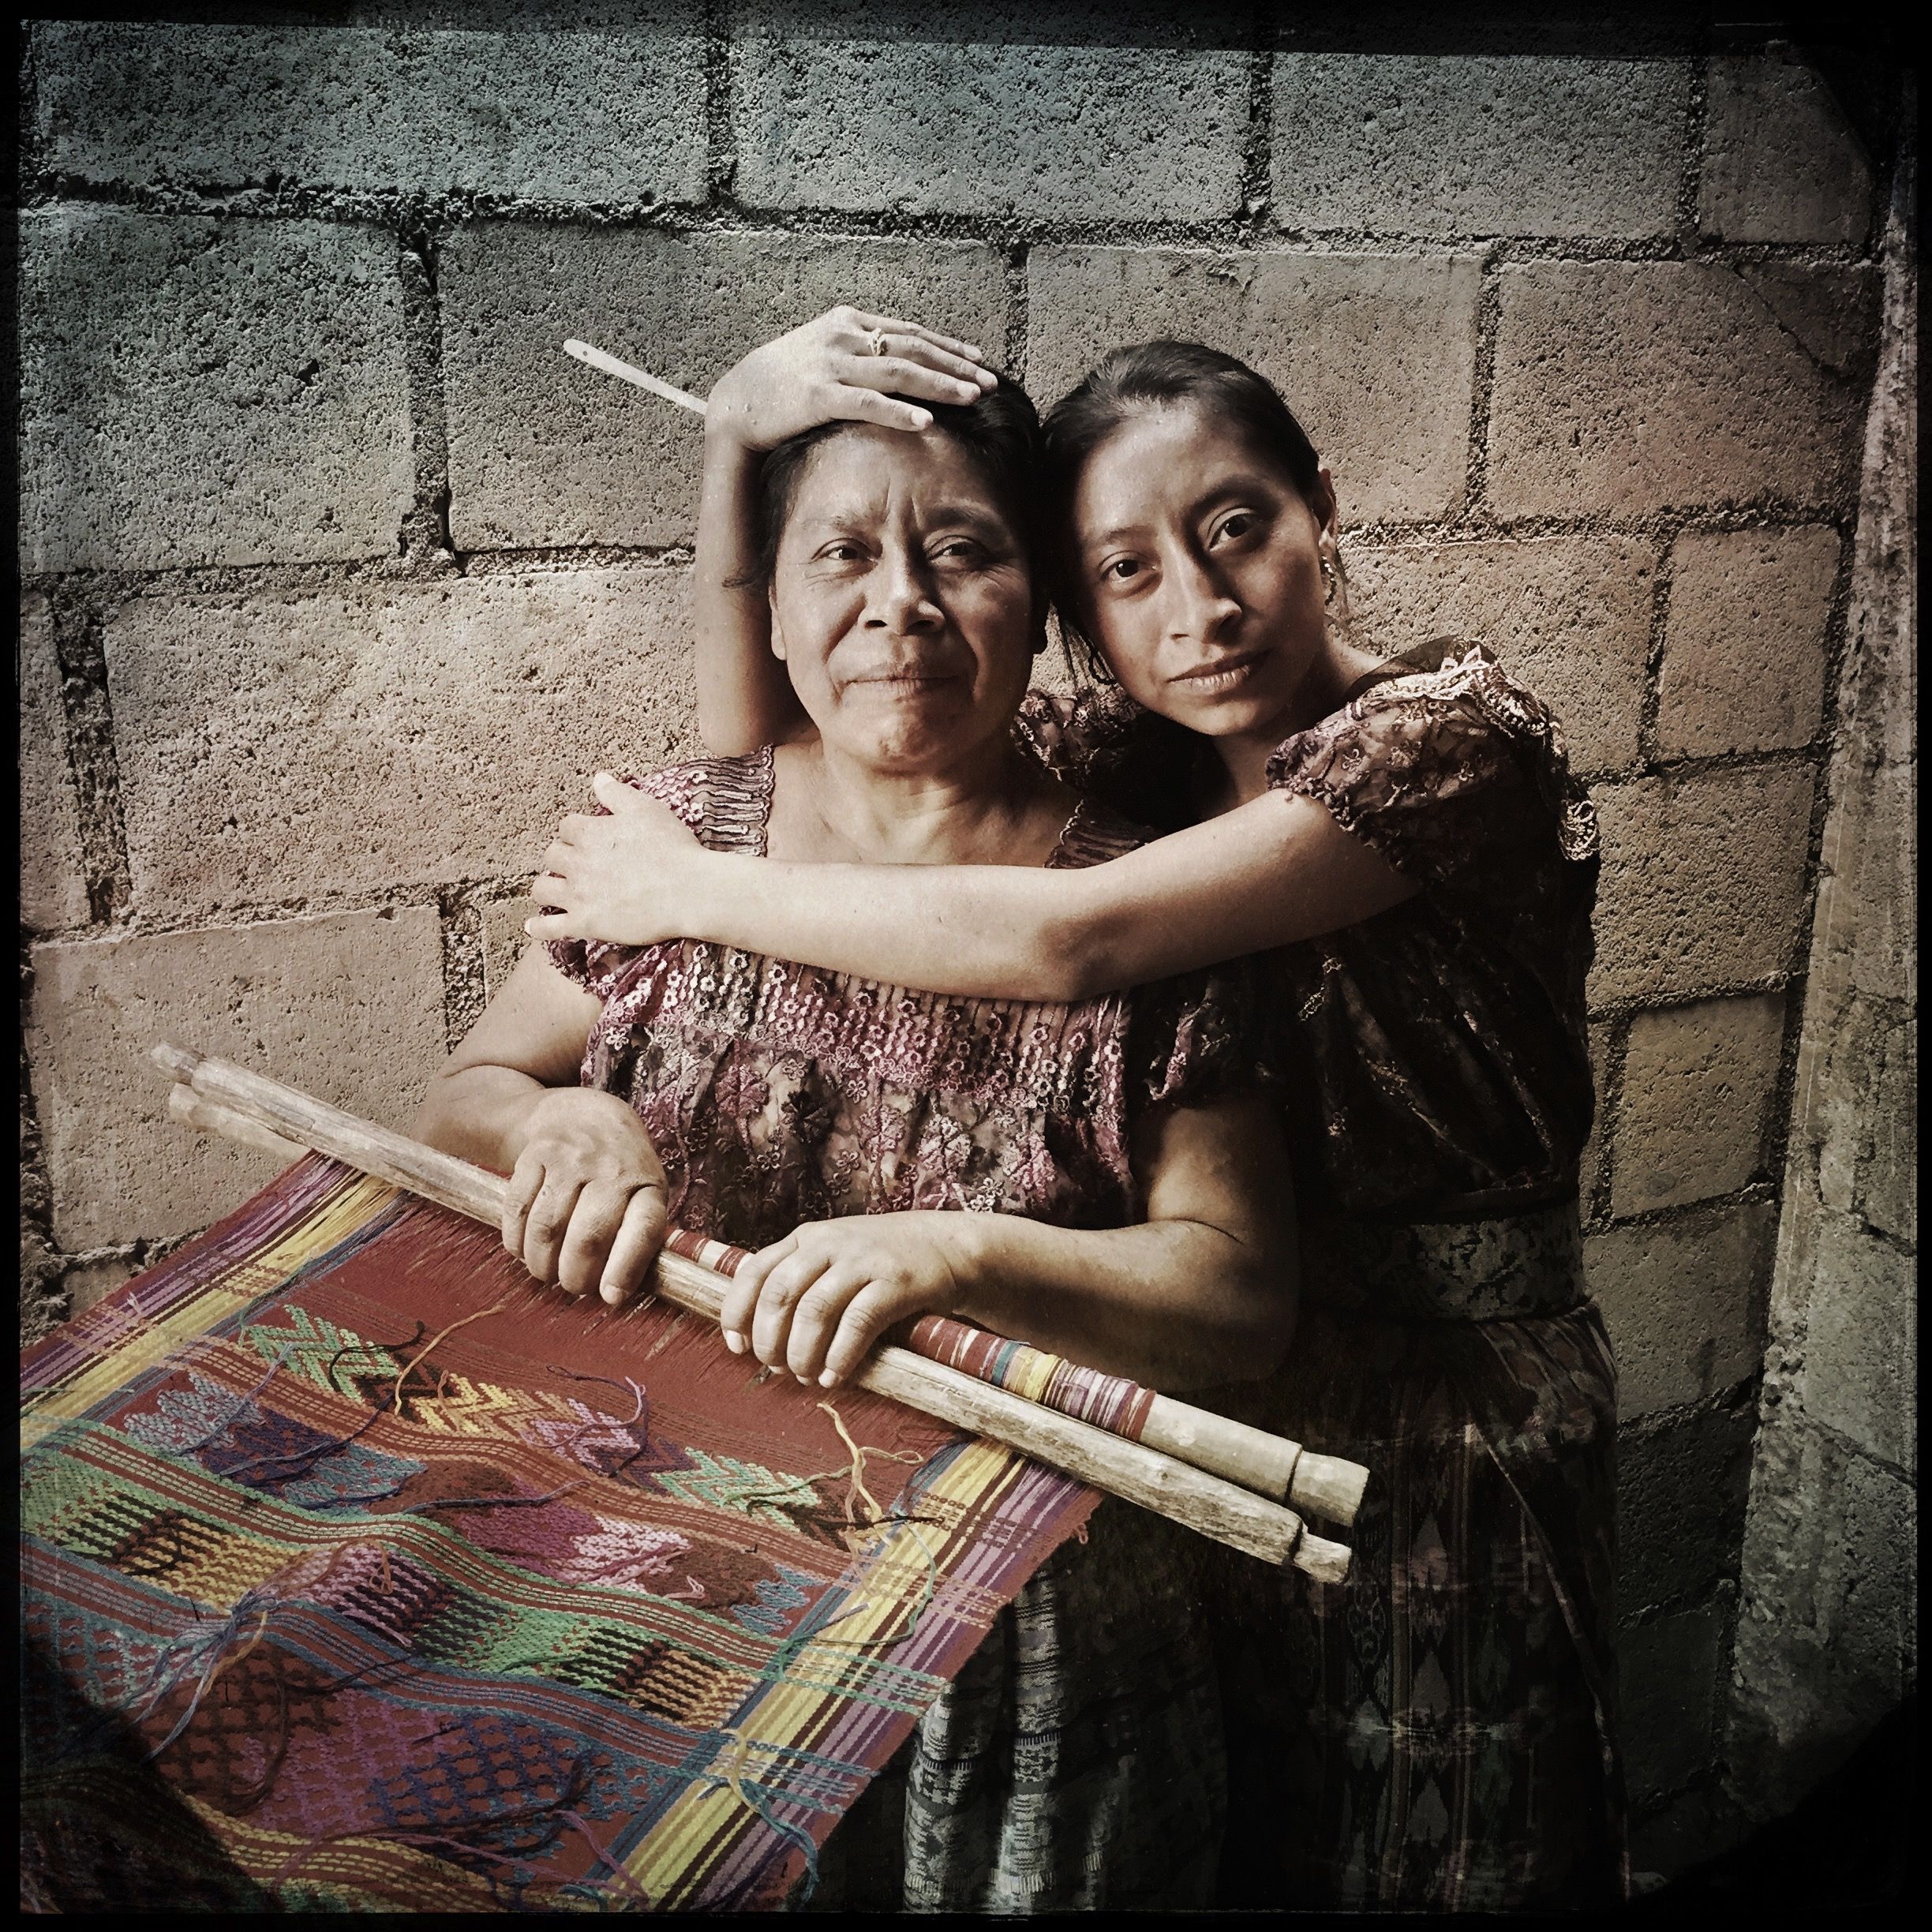 Augustina Lopez Lopez and her daughter, Jessica Roxana Lopez Lopez, of San Antonio Aguas Calientes, Guatemala, recently received an efficient wood-burning stove from the aid group Stove Team International. The air in the kitchen where Augustina weaves is less smoky now, but on some days her eyes are still badly irritated. Photo by Lynn Johnson. Guatemala, 2017.